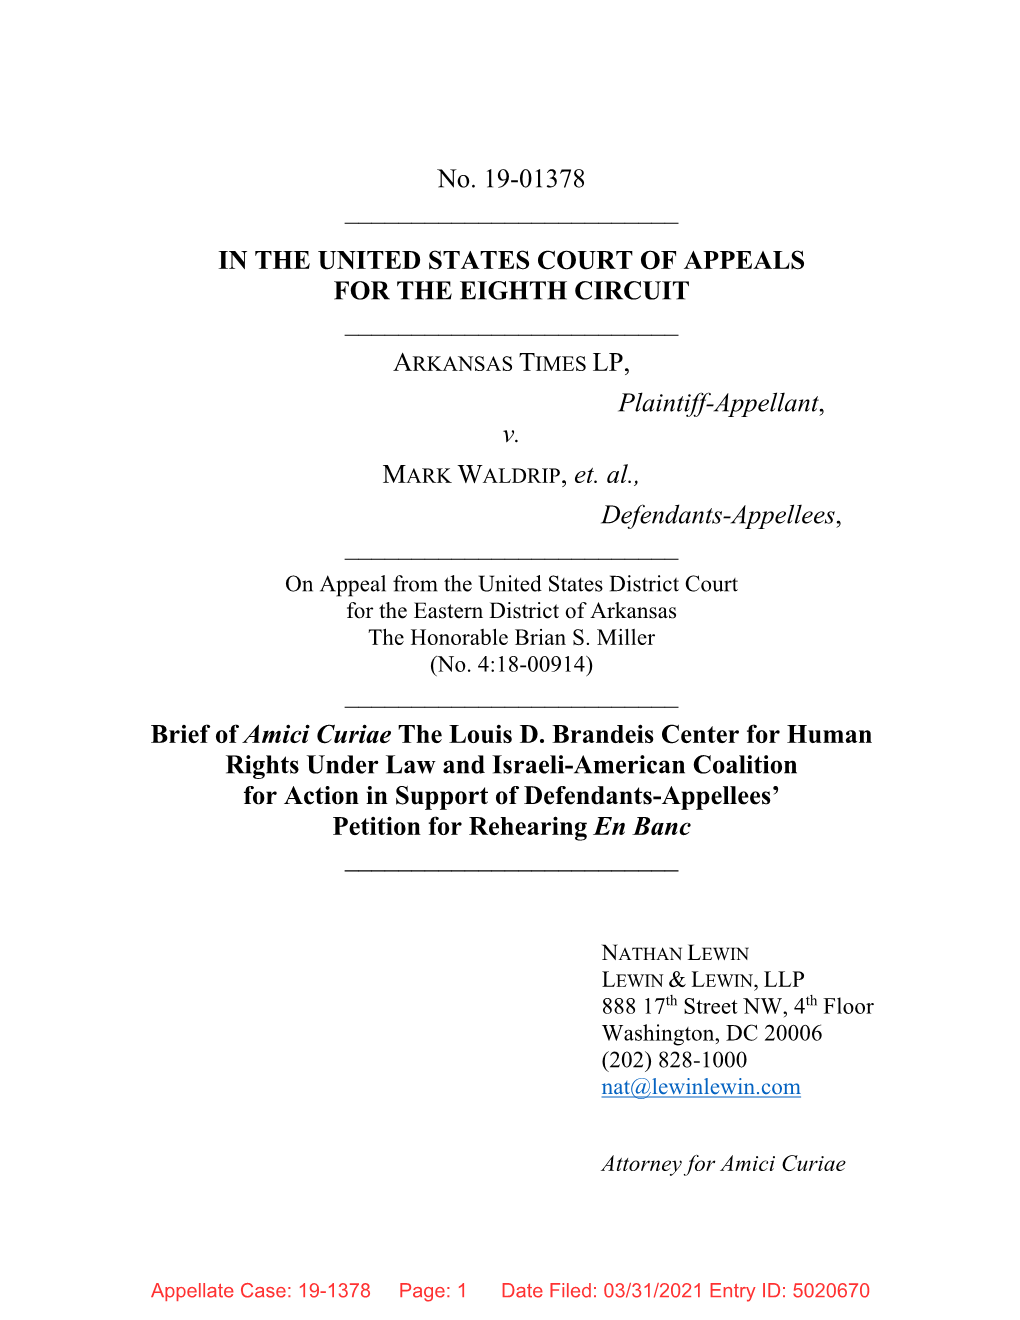 LDB and IAC – 8Th Circuit Amicus Brief Filed In